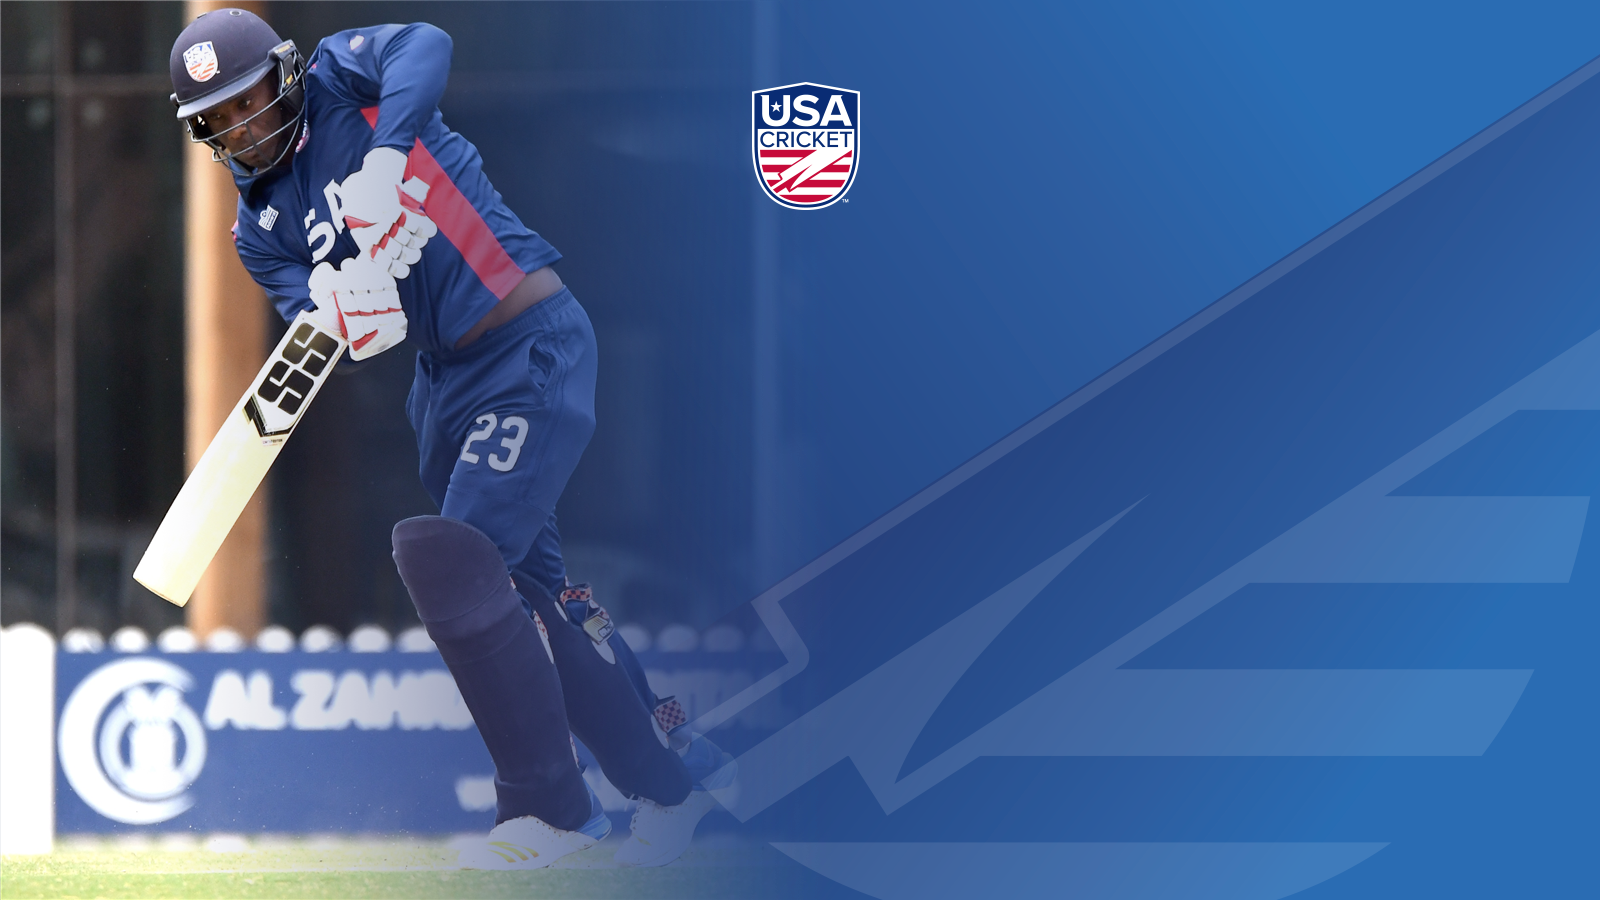 Majestic Mohammed the difference as USA lose to Trinidad in Super50